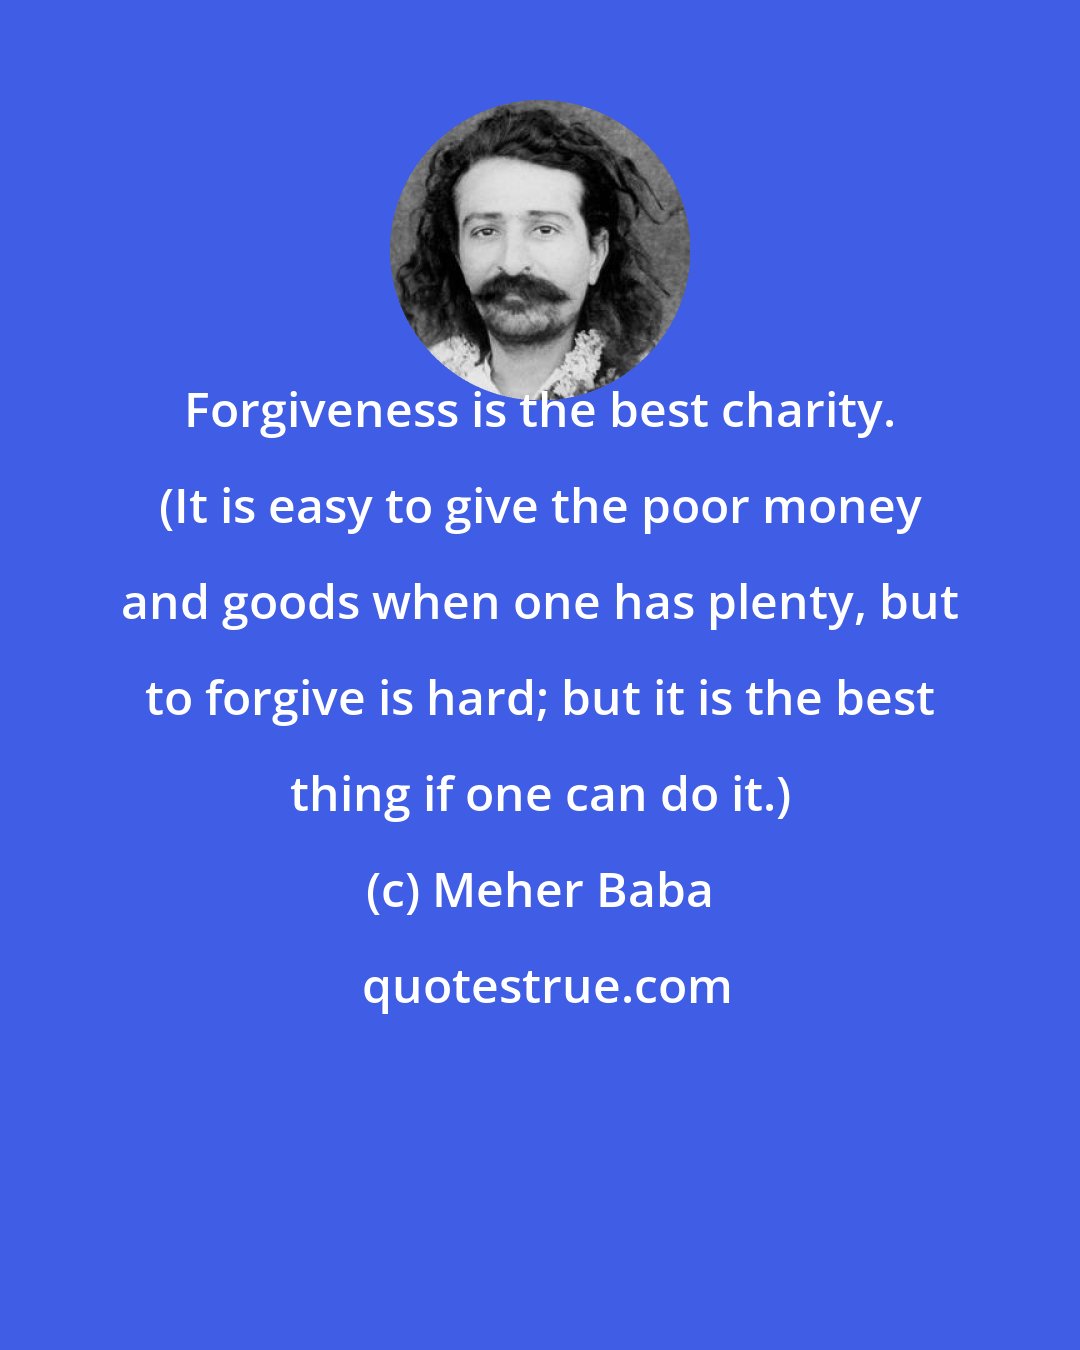 Meher Baba: Forgiveness is the best charity. (It is easy to give the poor money and goods when one has plenty, but to forgive is hard; but it is the best thing if one can do it.)